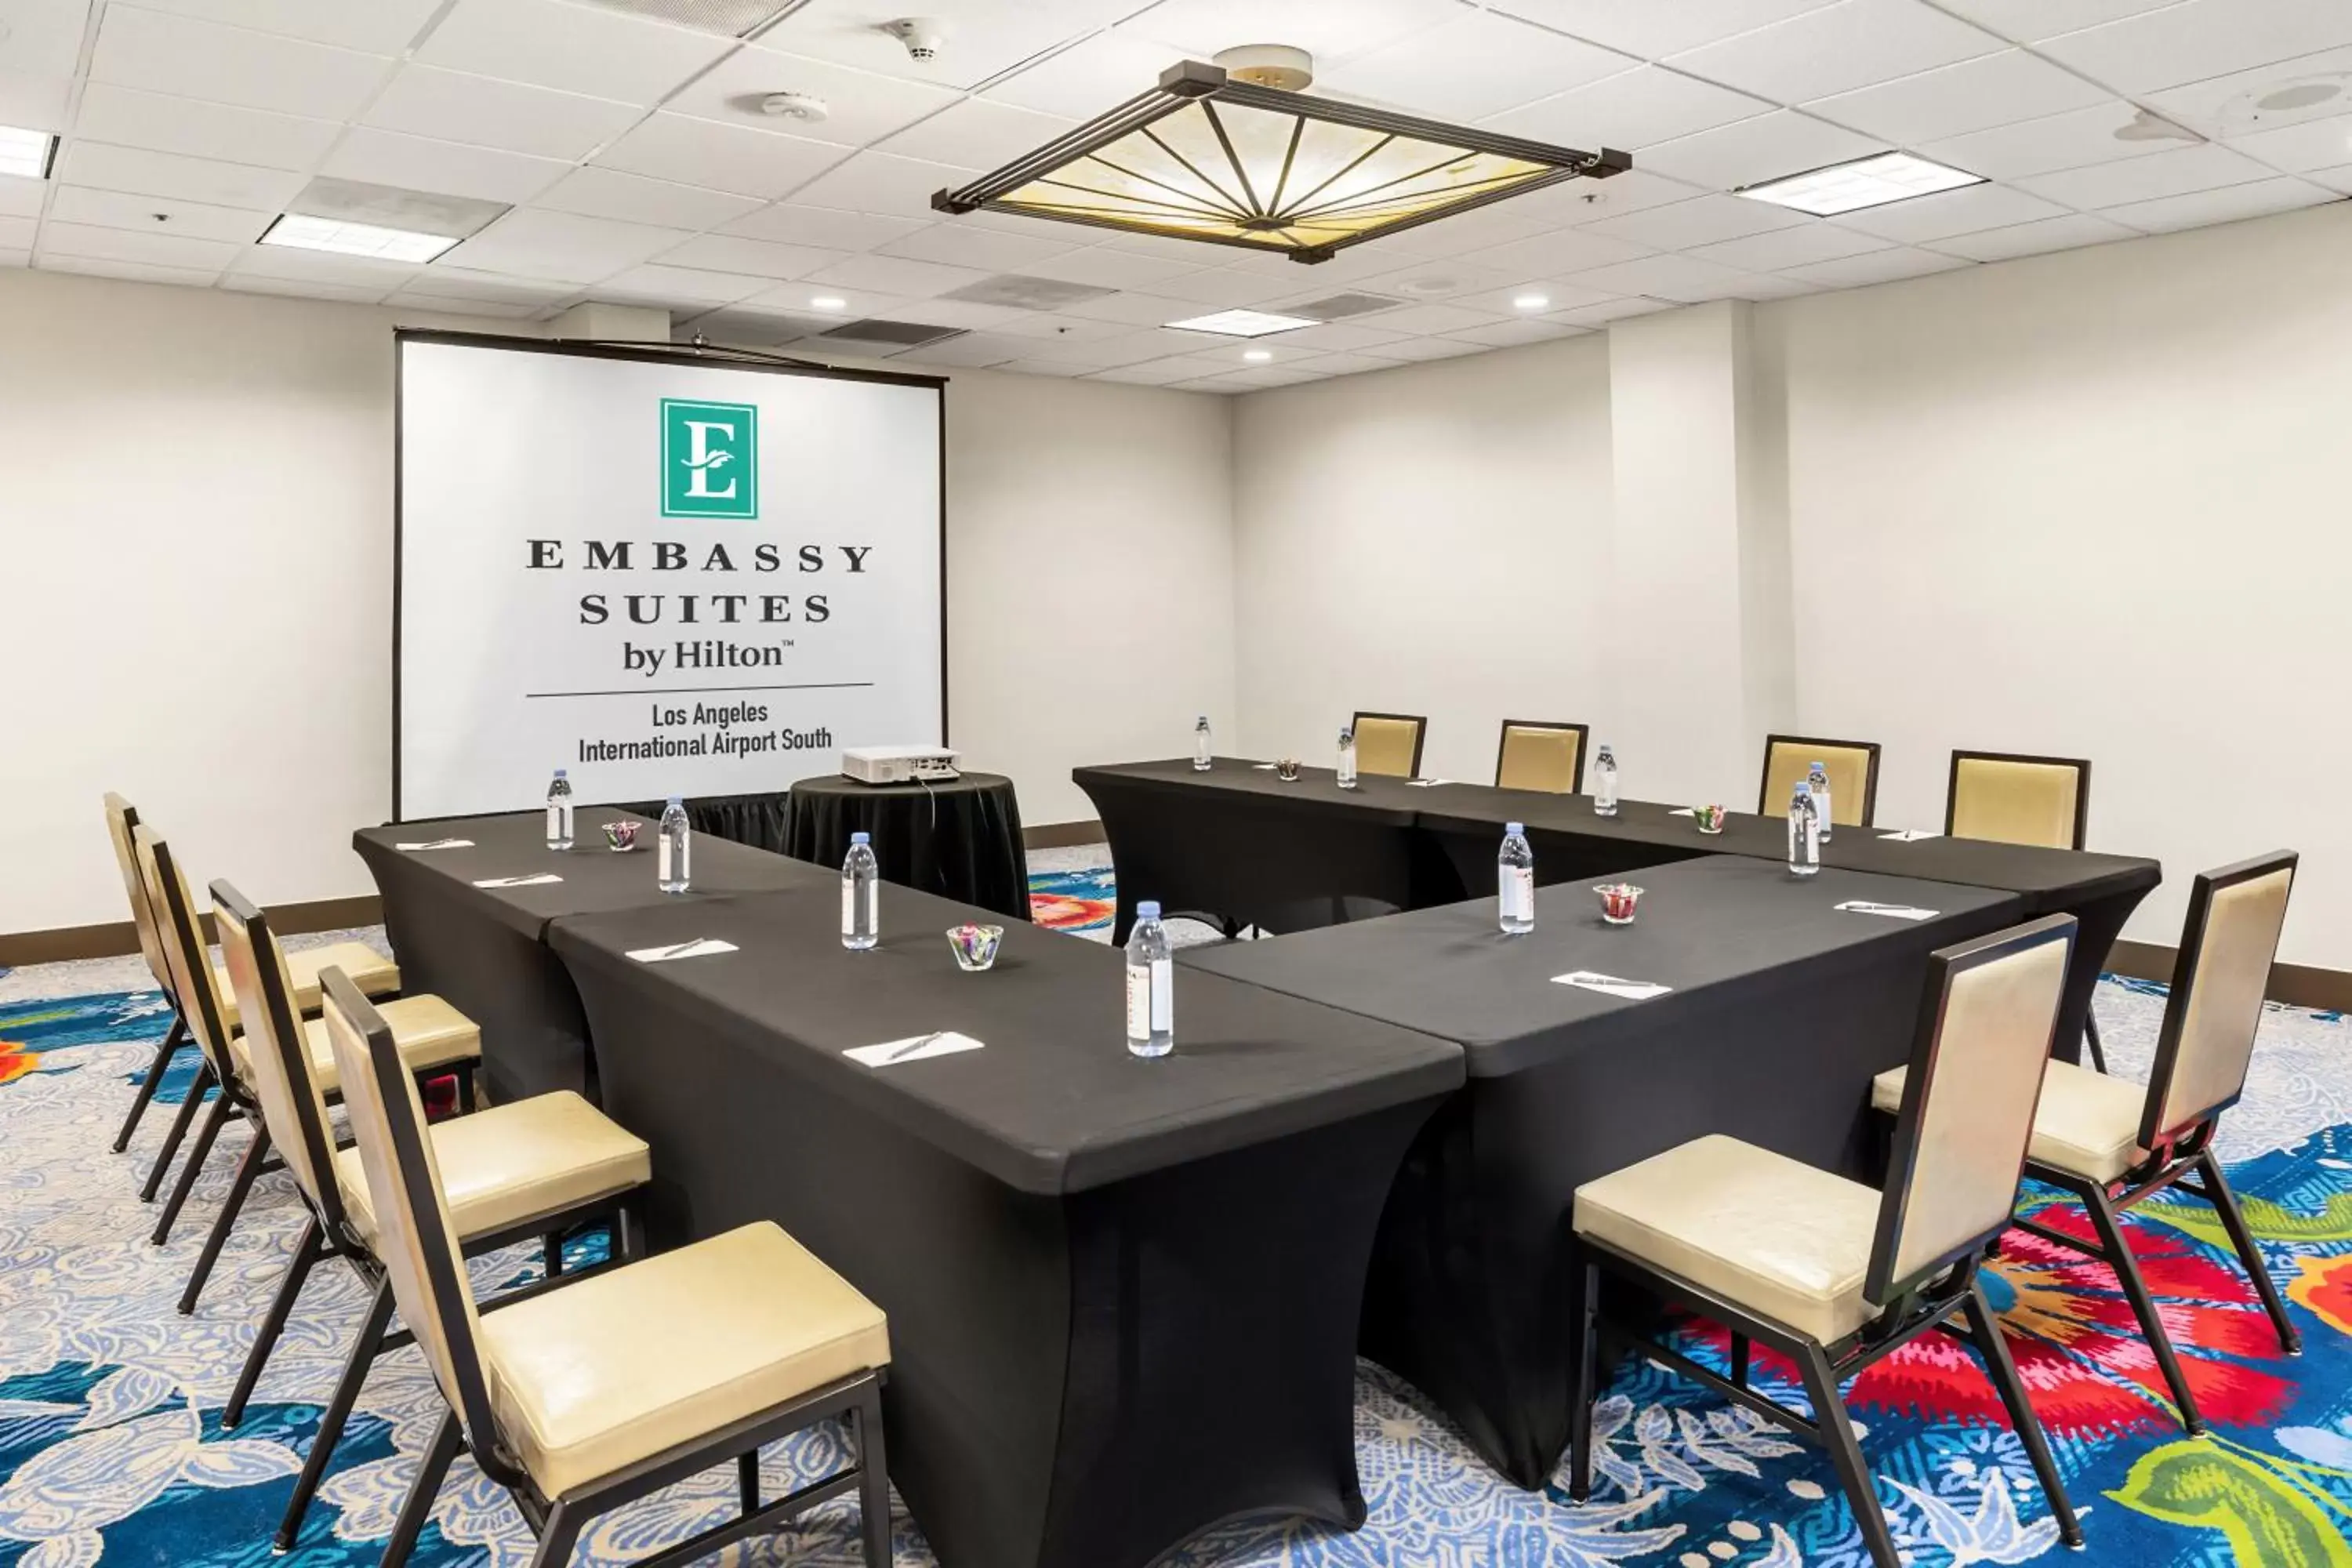 Meeting/conference room in Embassy Suites by Hilton Los Angeles International Airport South